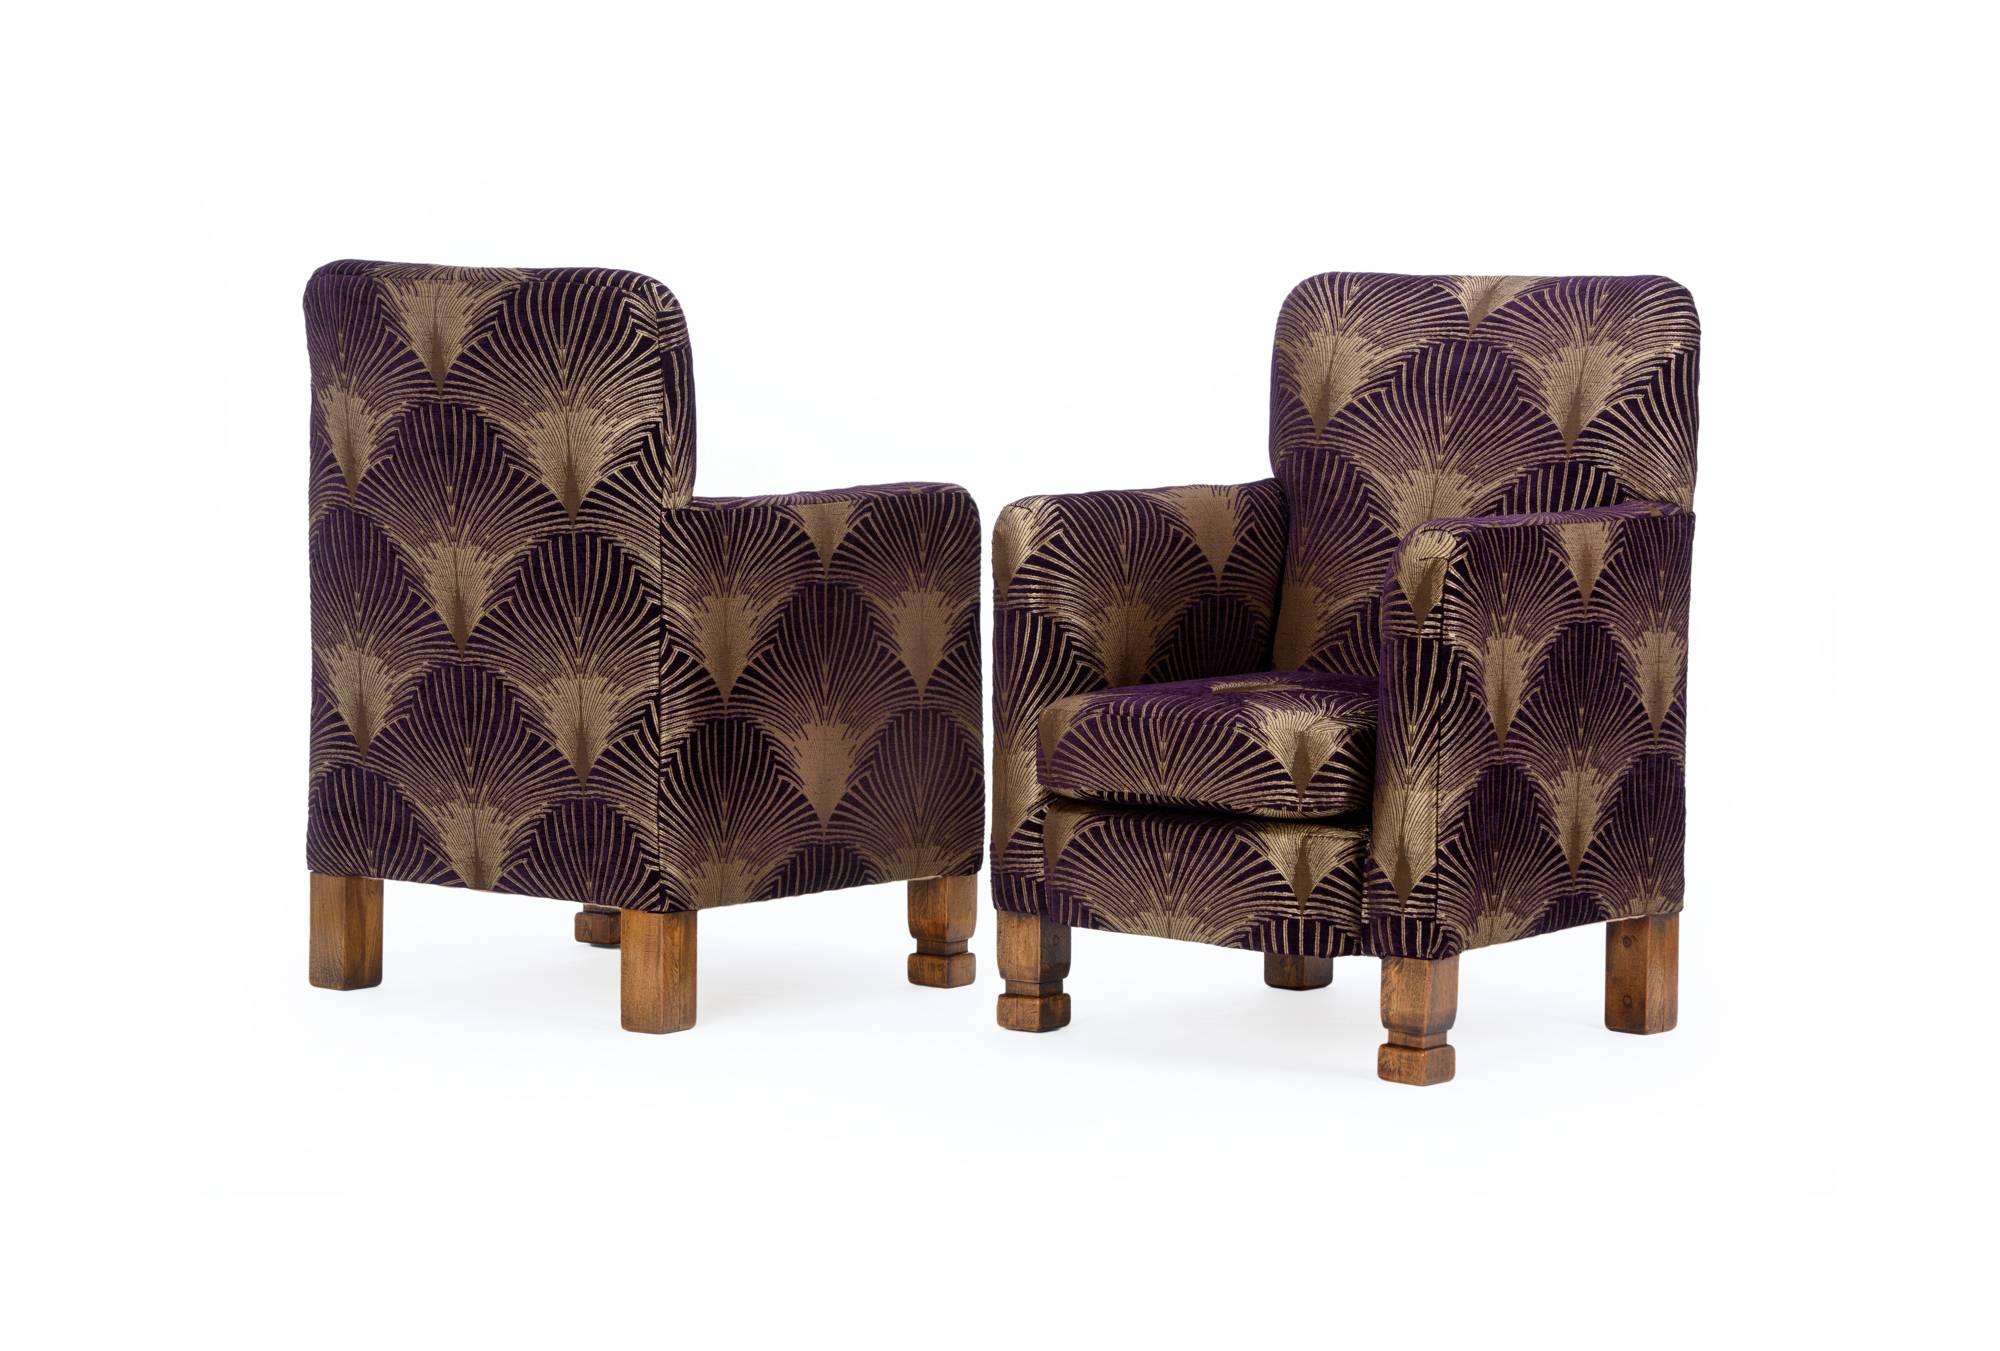 The Duo of Art Deco Style Aubergine 'Metropolis' Armchairs. In Good Condition For Sale In London, GB